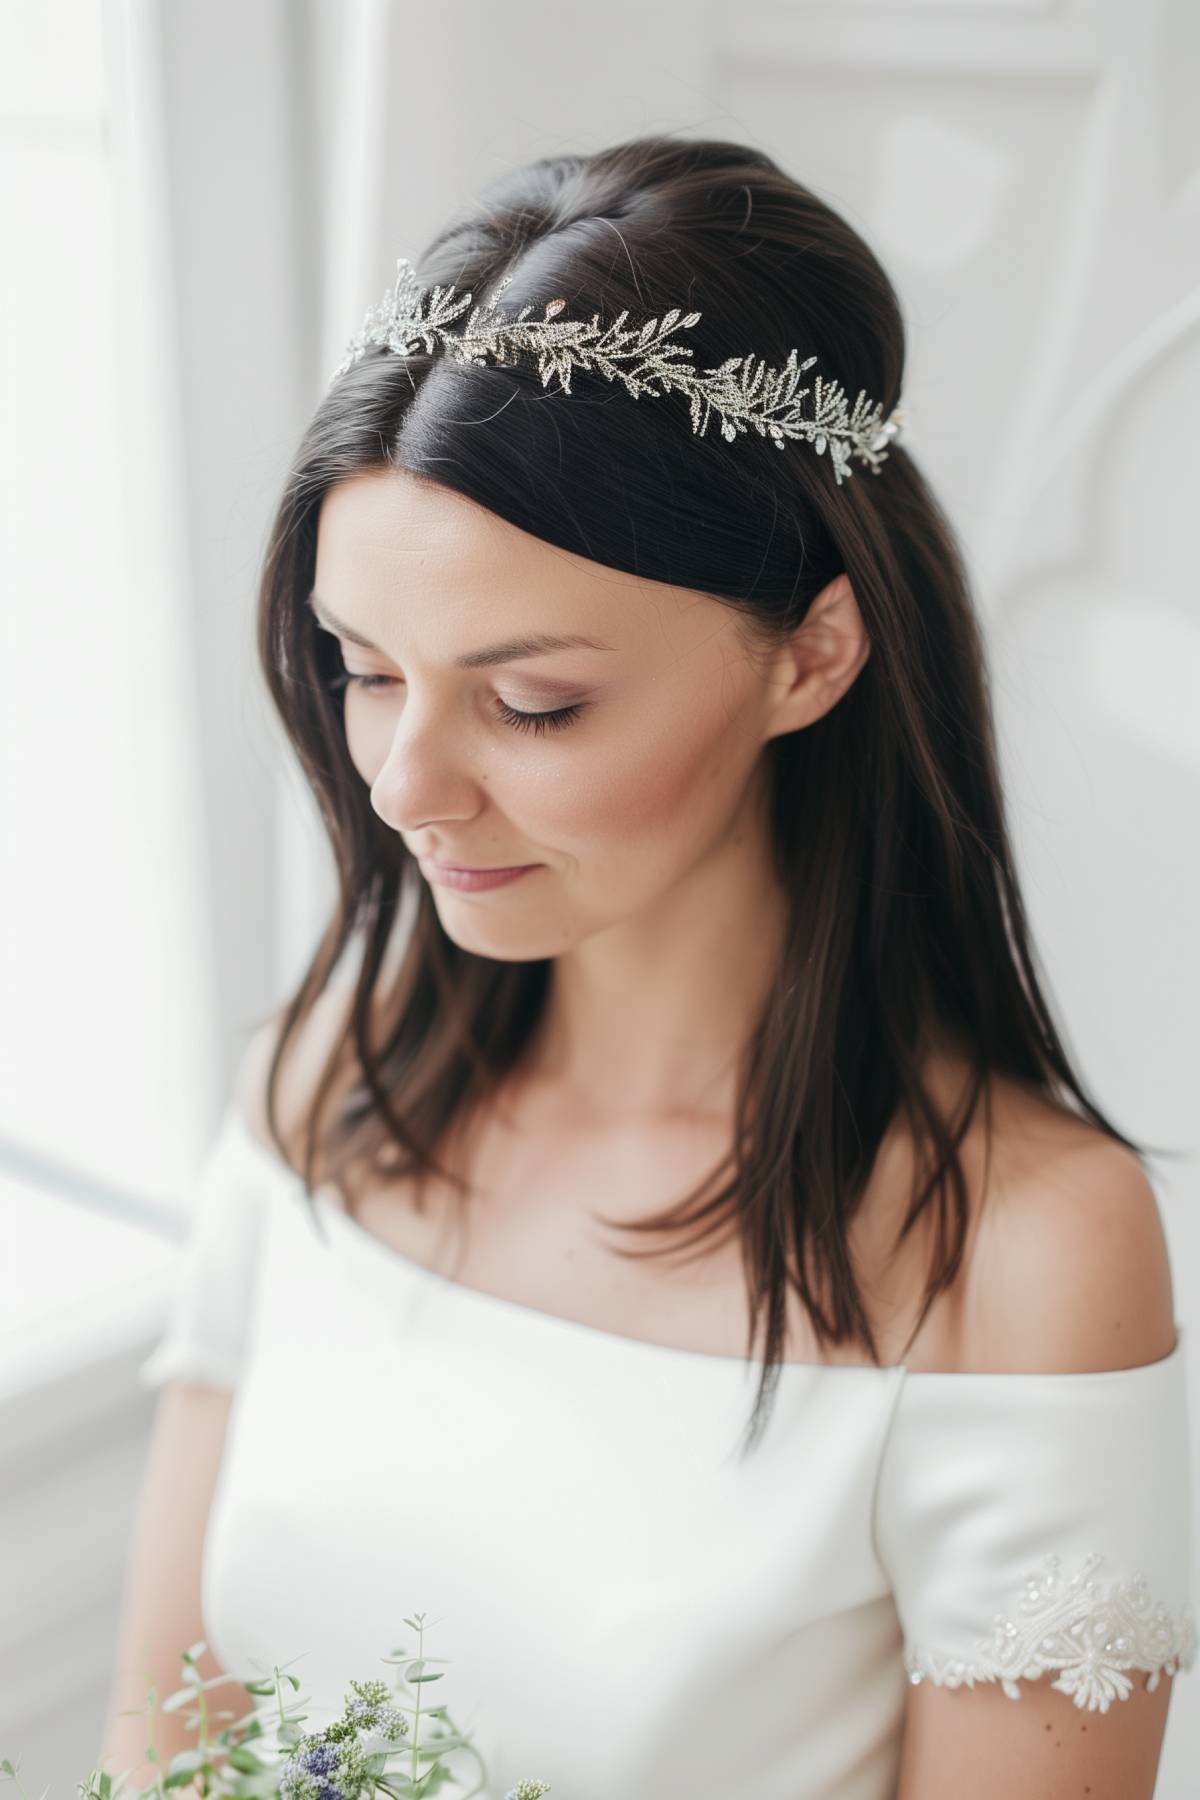 Bride wearing a smooth, sleek bob hairstyle enhanced with a delicate tiara, epitomizing classic elegance for a wedding.